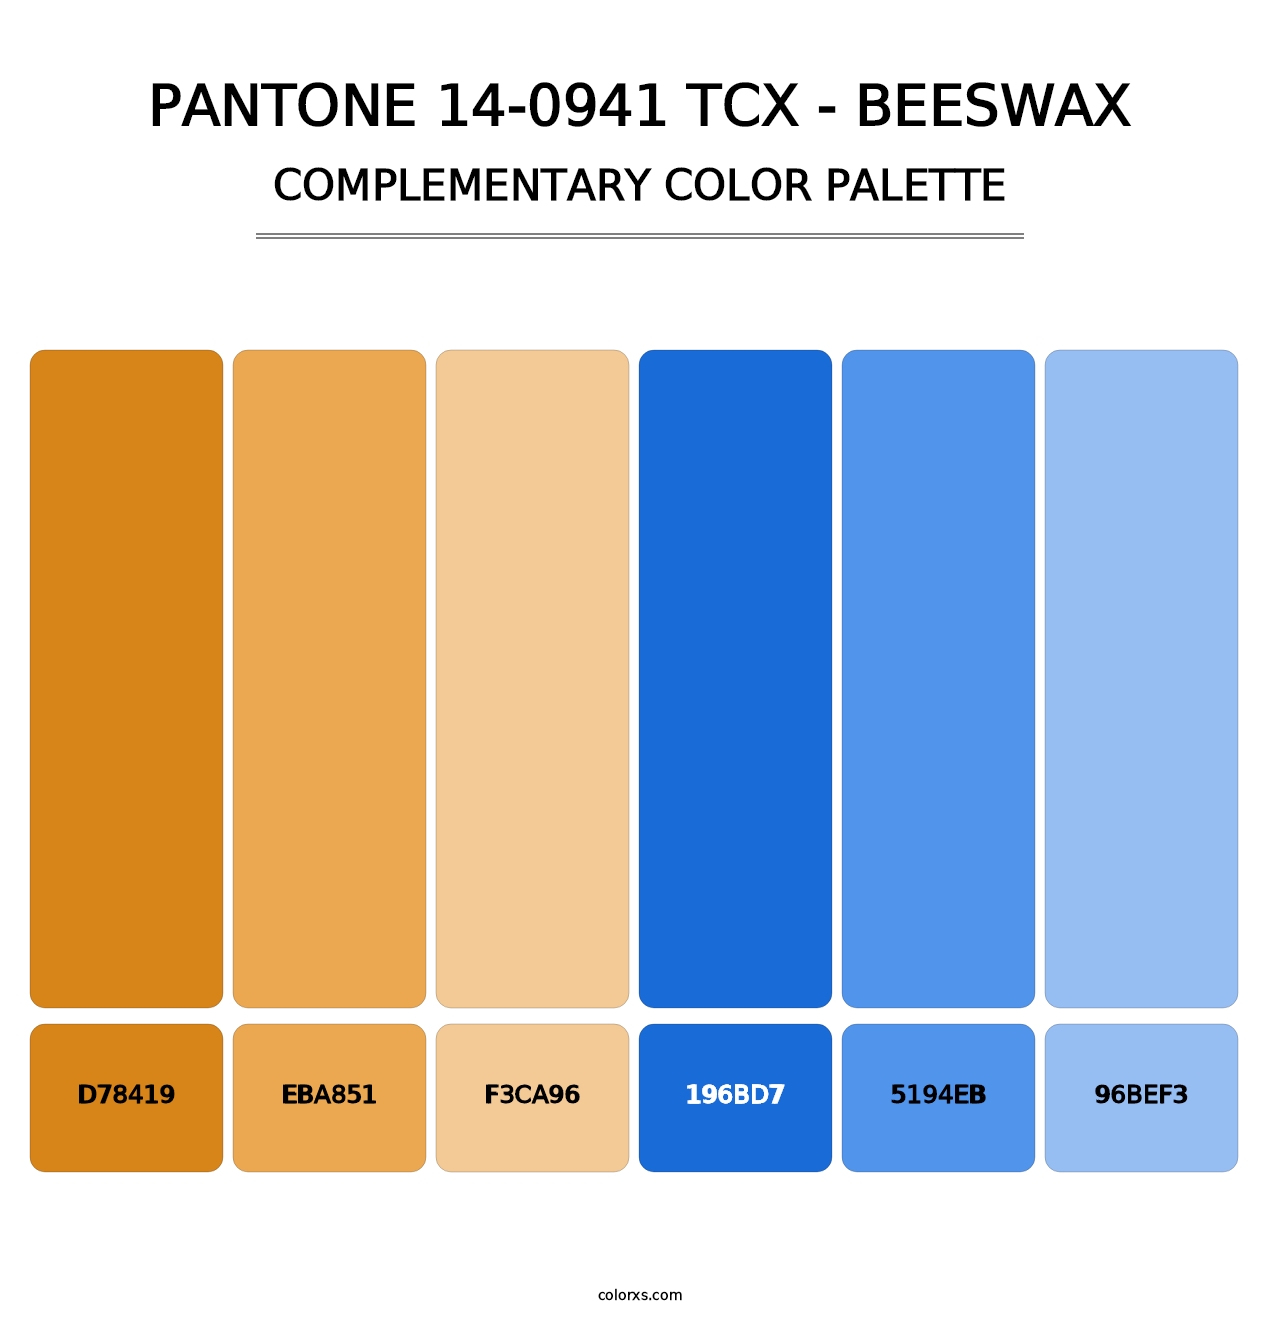 PANTONE 14-0941 TCX - Beeswax - Complementary Color Palette